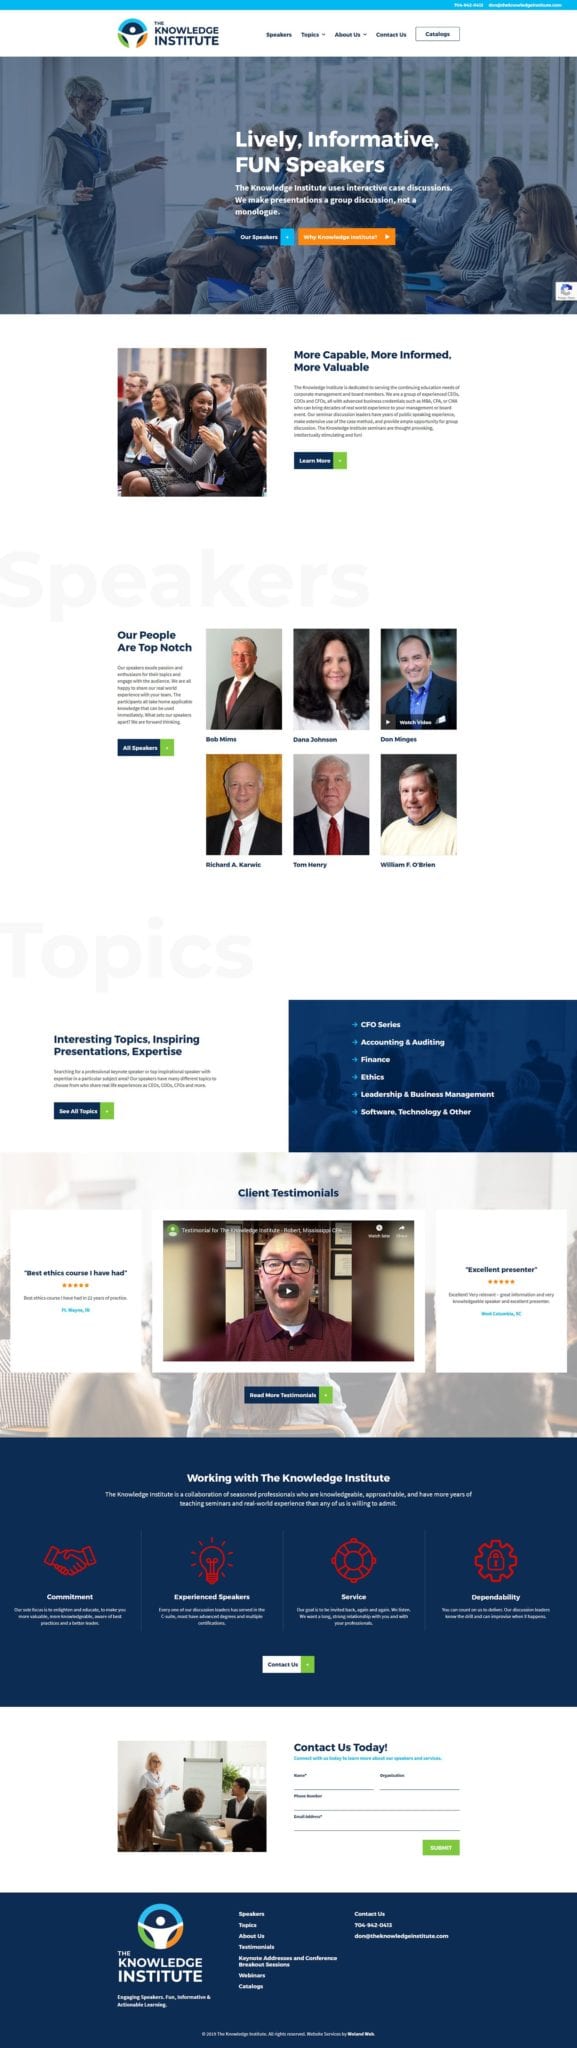 The Knowledge Institute website home page screenshot